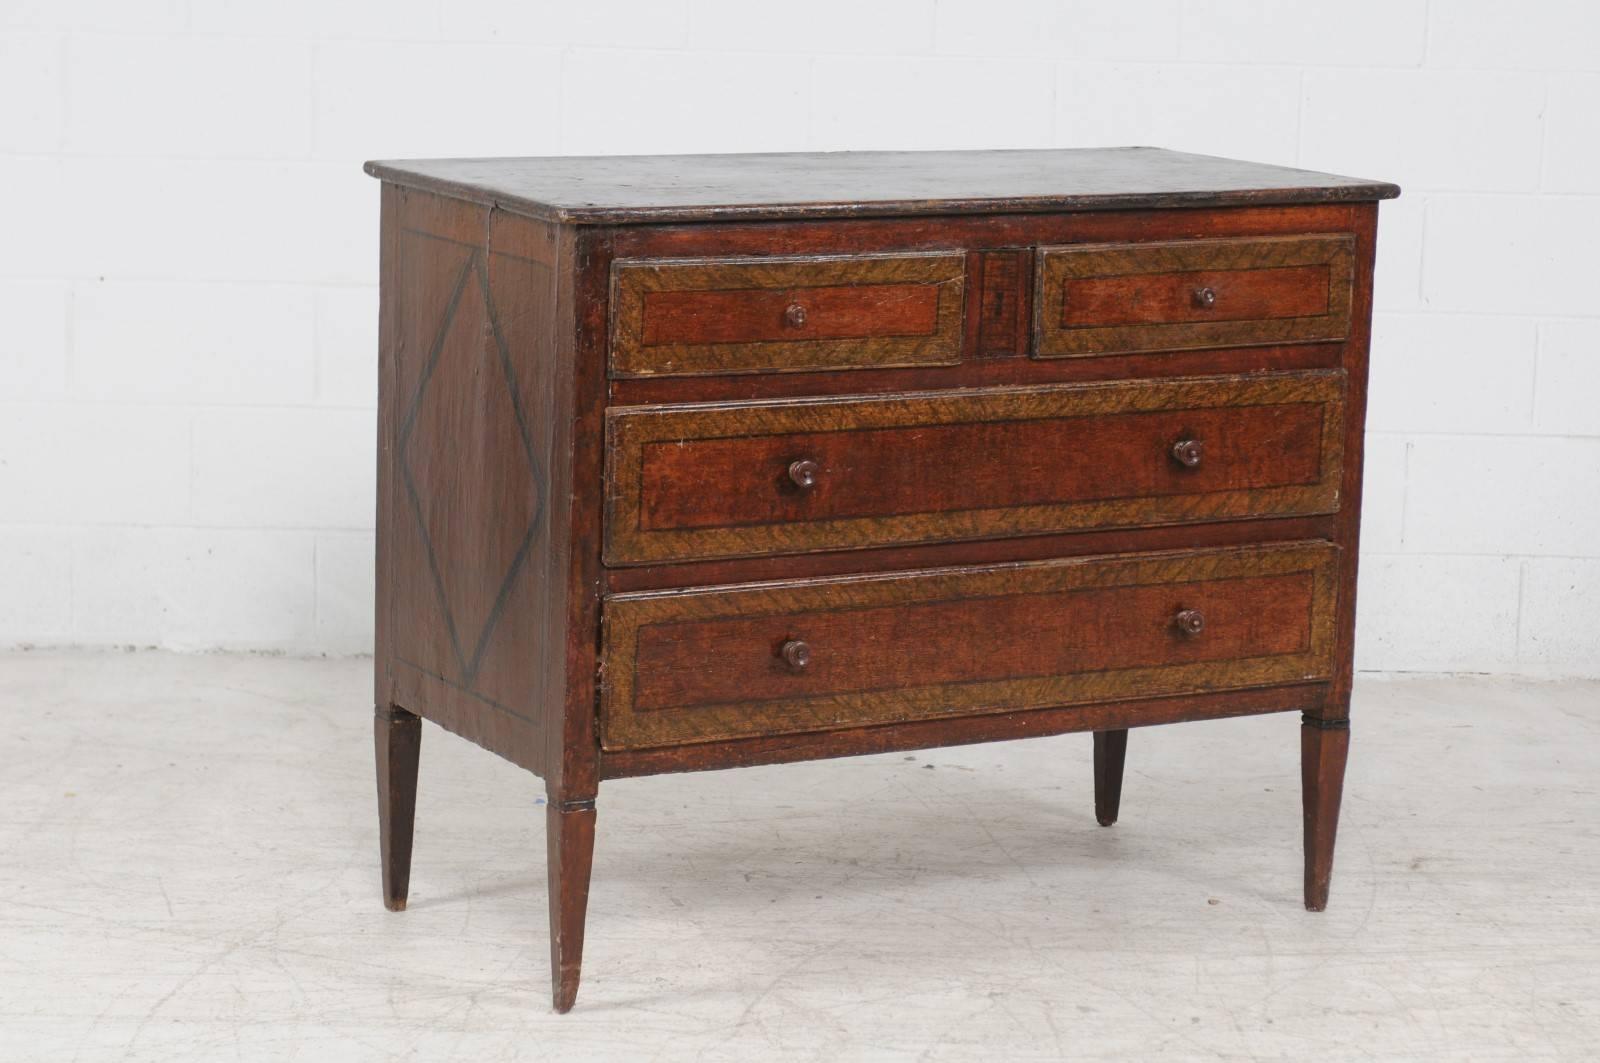 An Italian neoclassical painted wood four-drawer commode with diamond motifs on the side panels, from the early 19th century. This Italian chest features a rectangular top sitting above four drawers, two smaller ones over two larger ones. Each